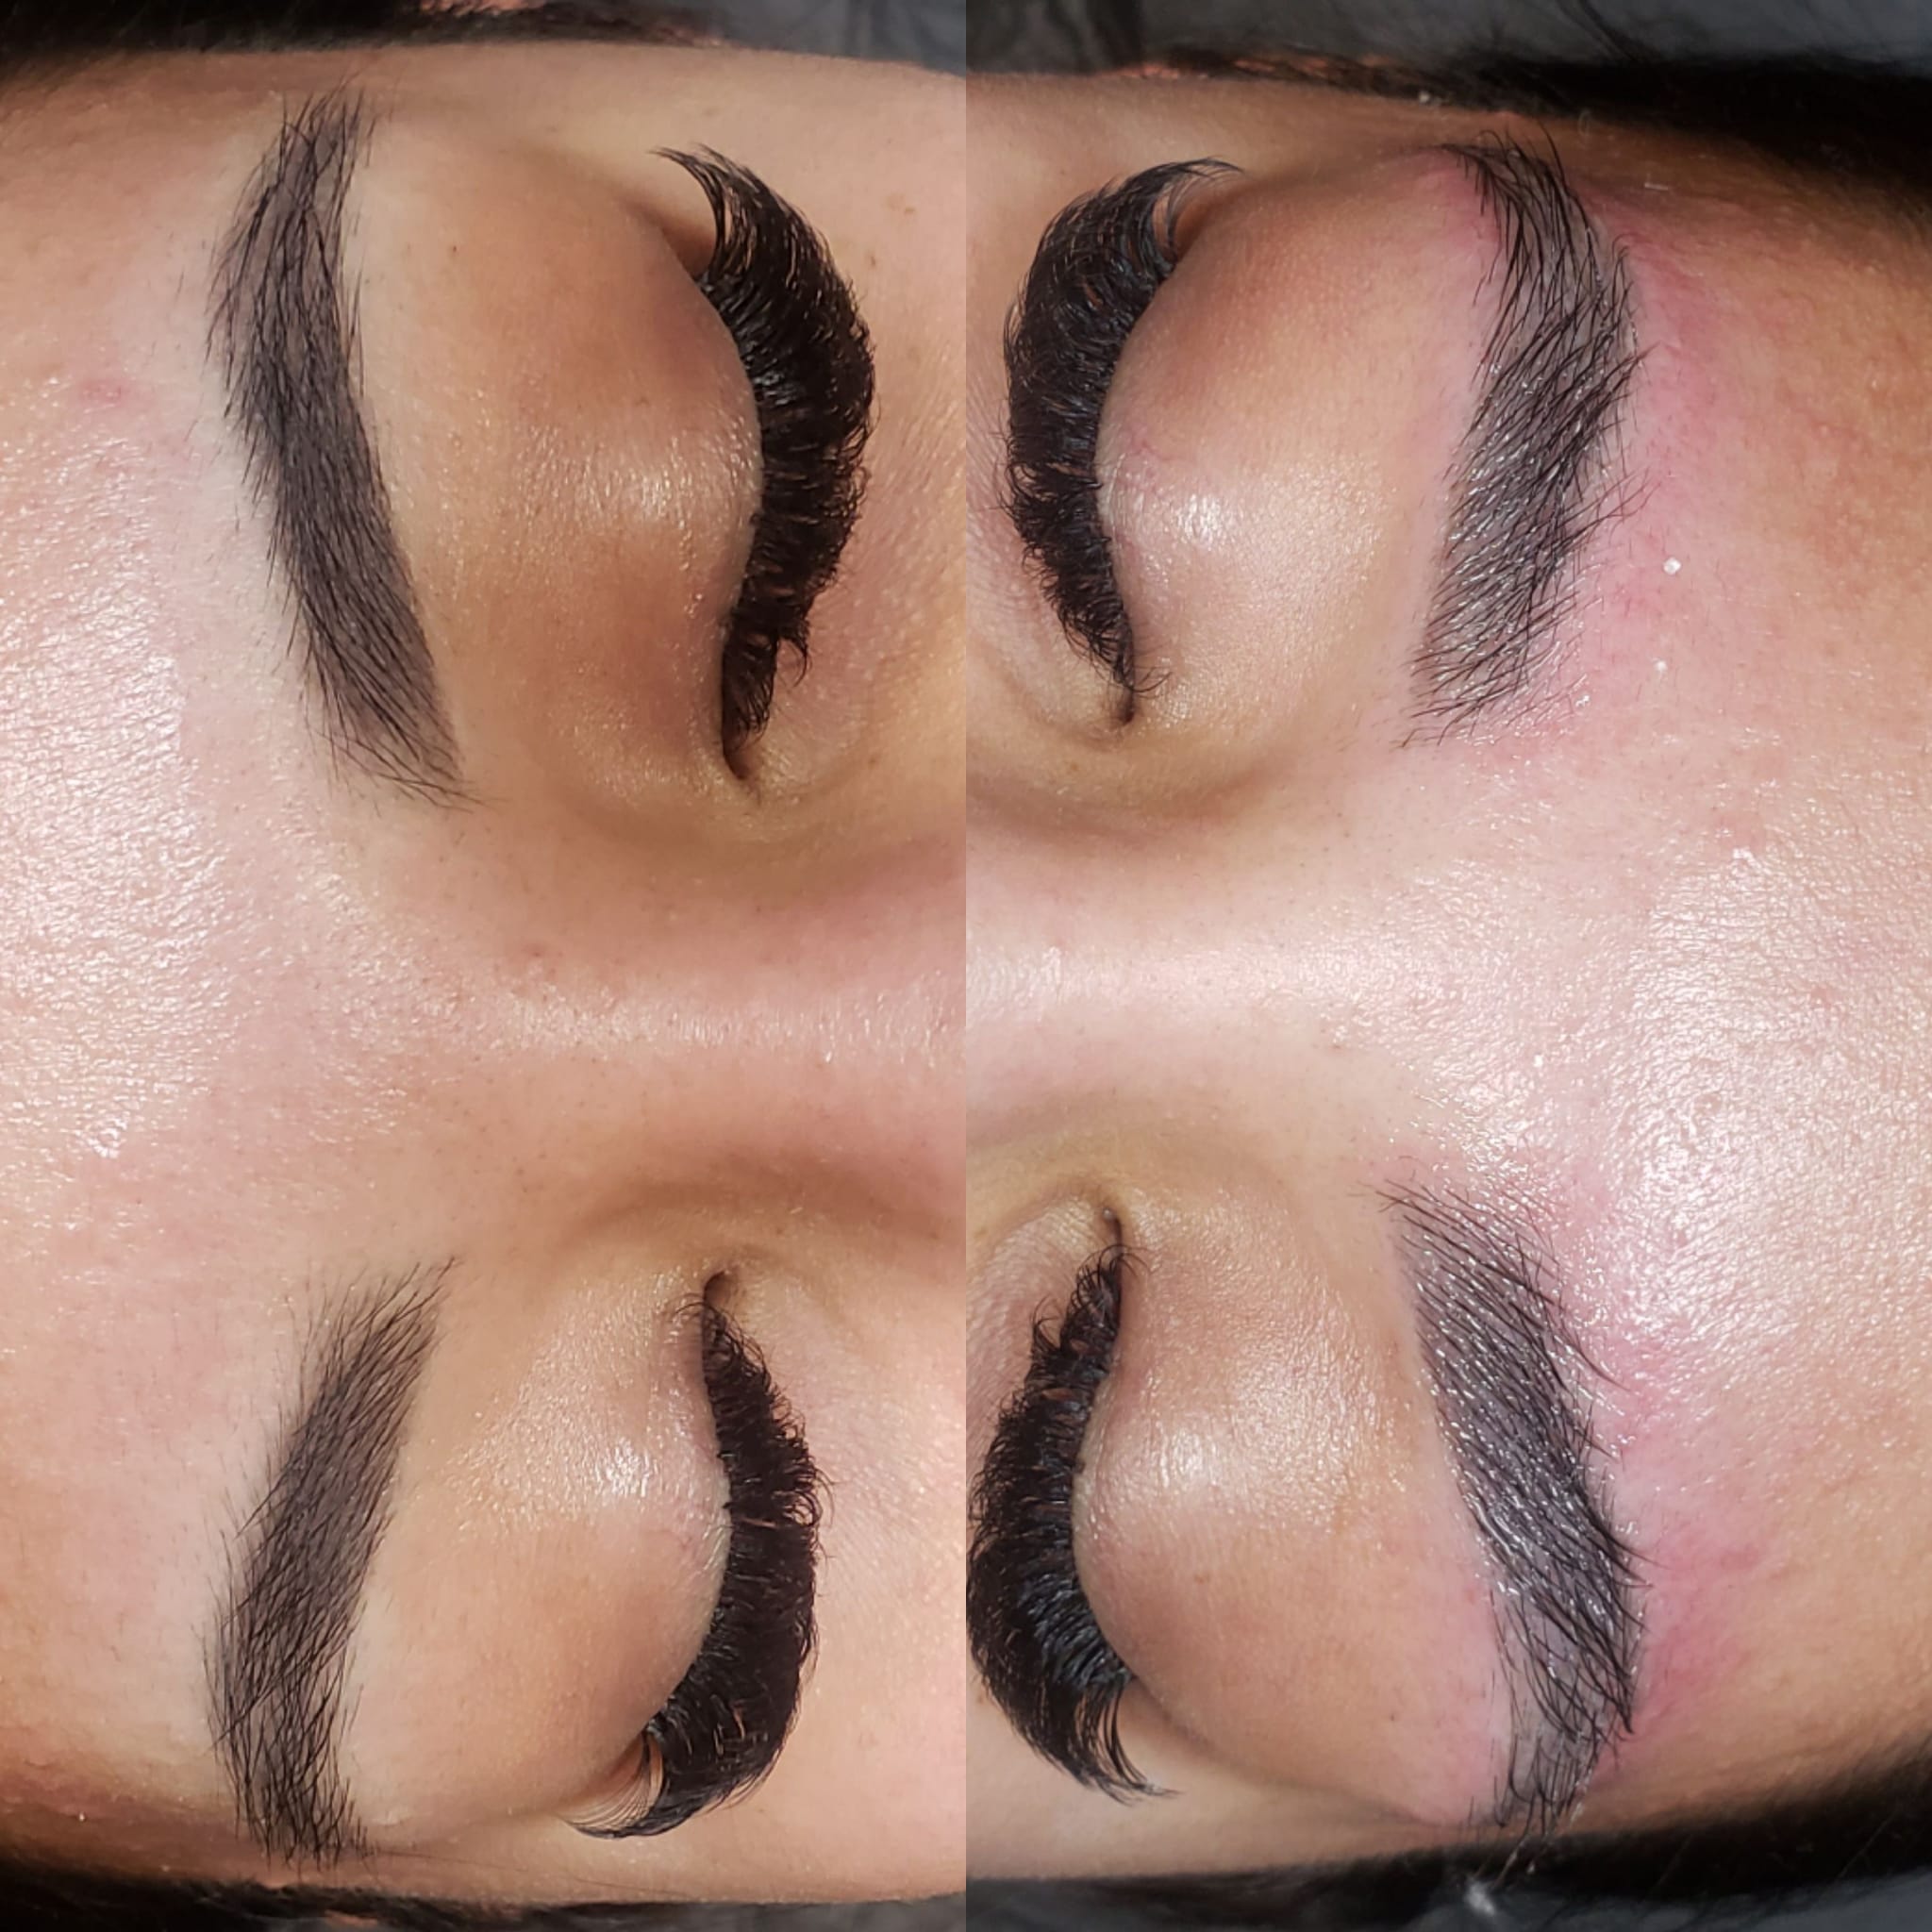 Tattooed Eyebrows After a Week: What to Expect?